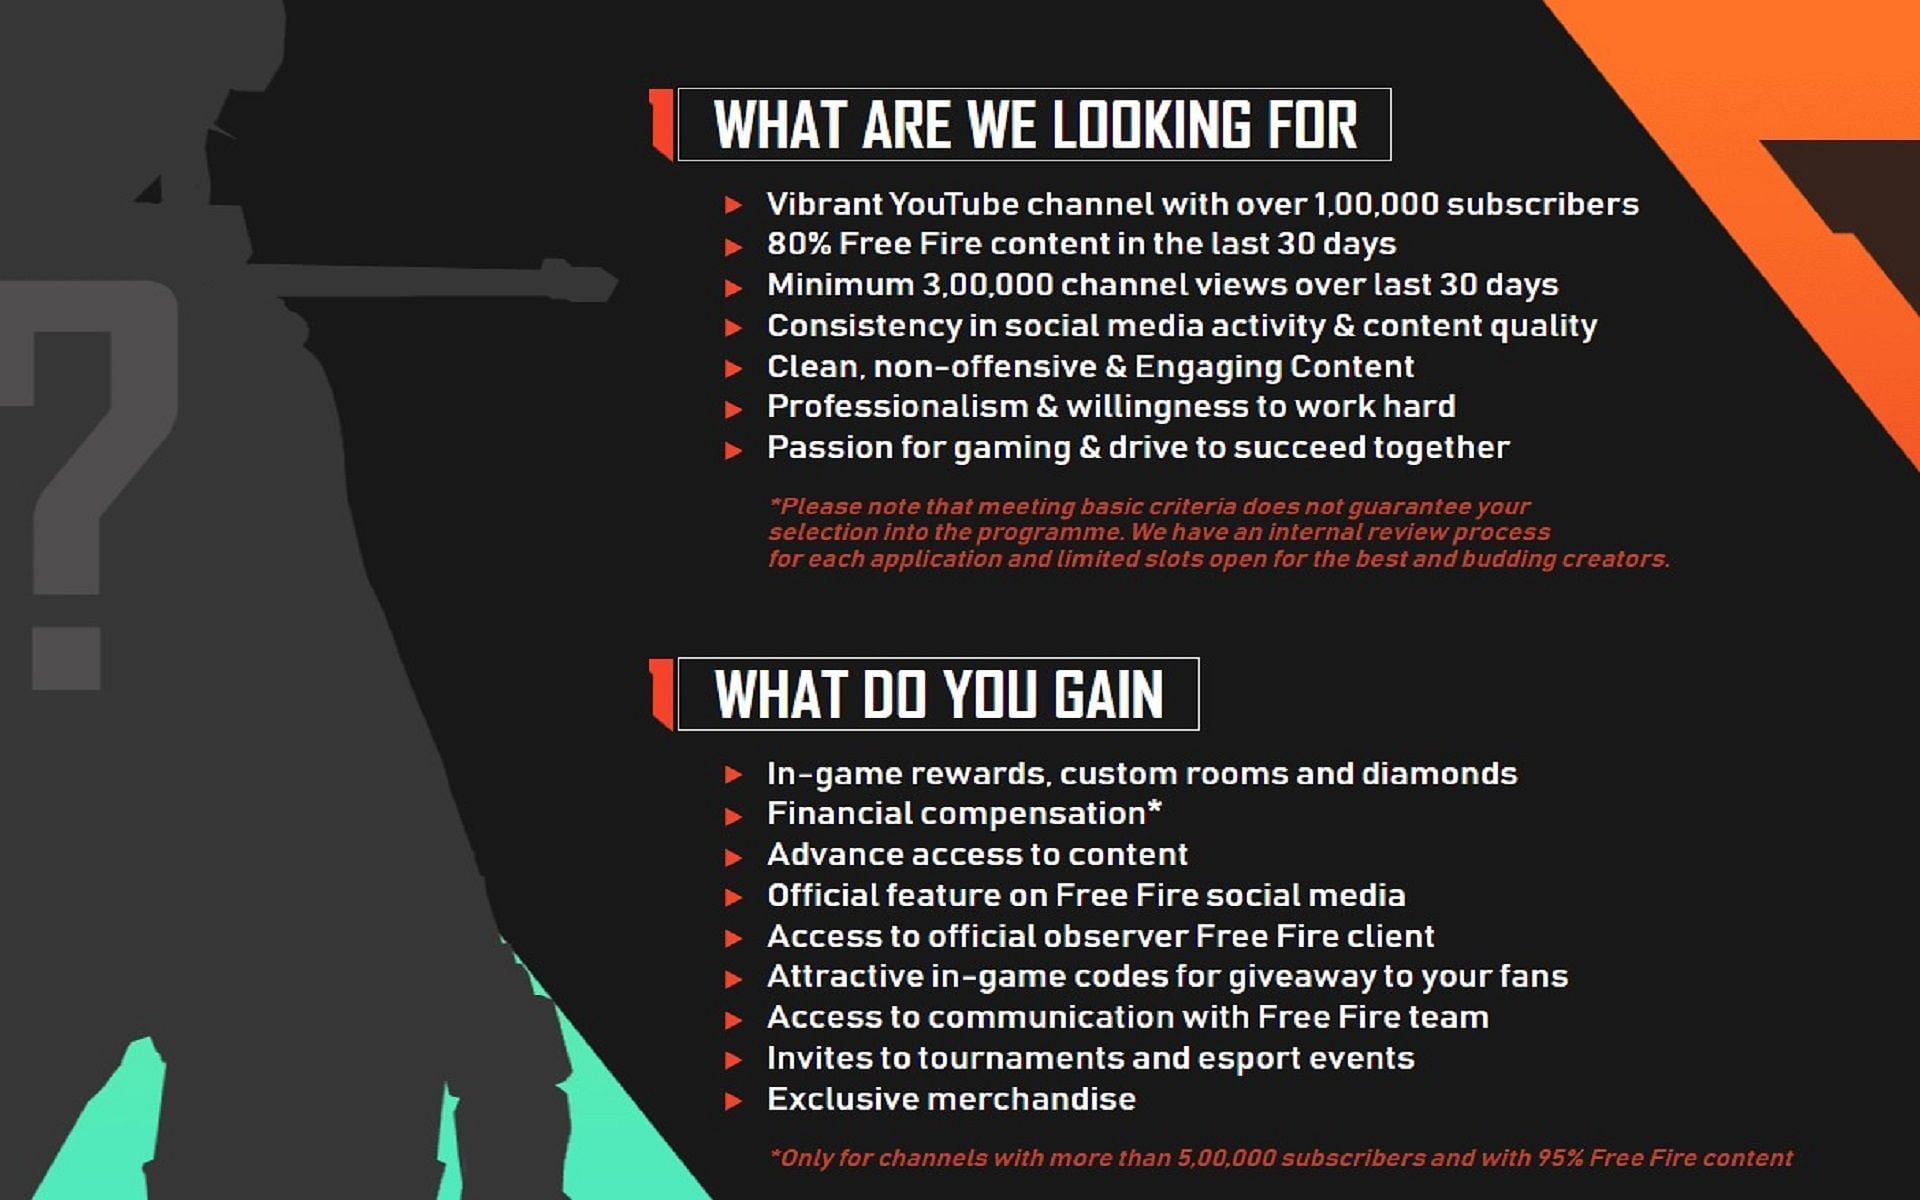 Partner Program gives the content creators a chance to grow further (Image via Garena)